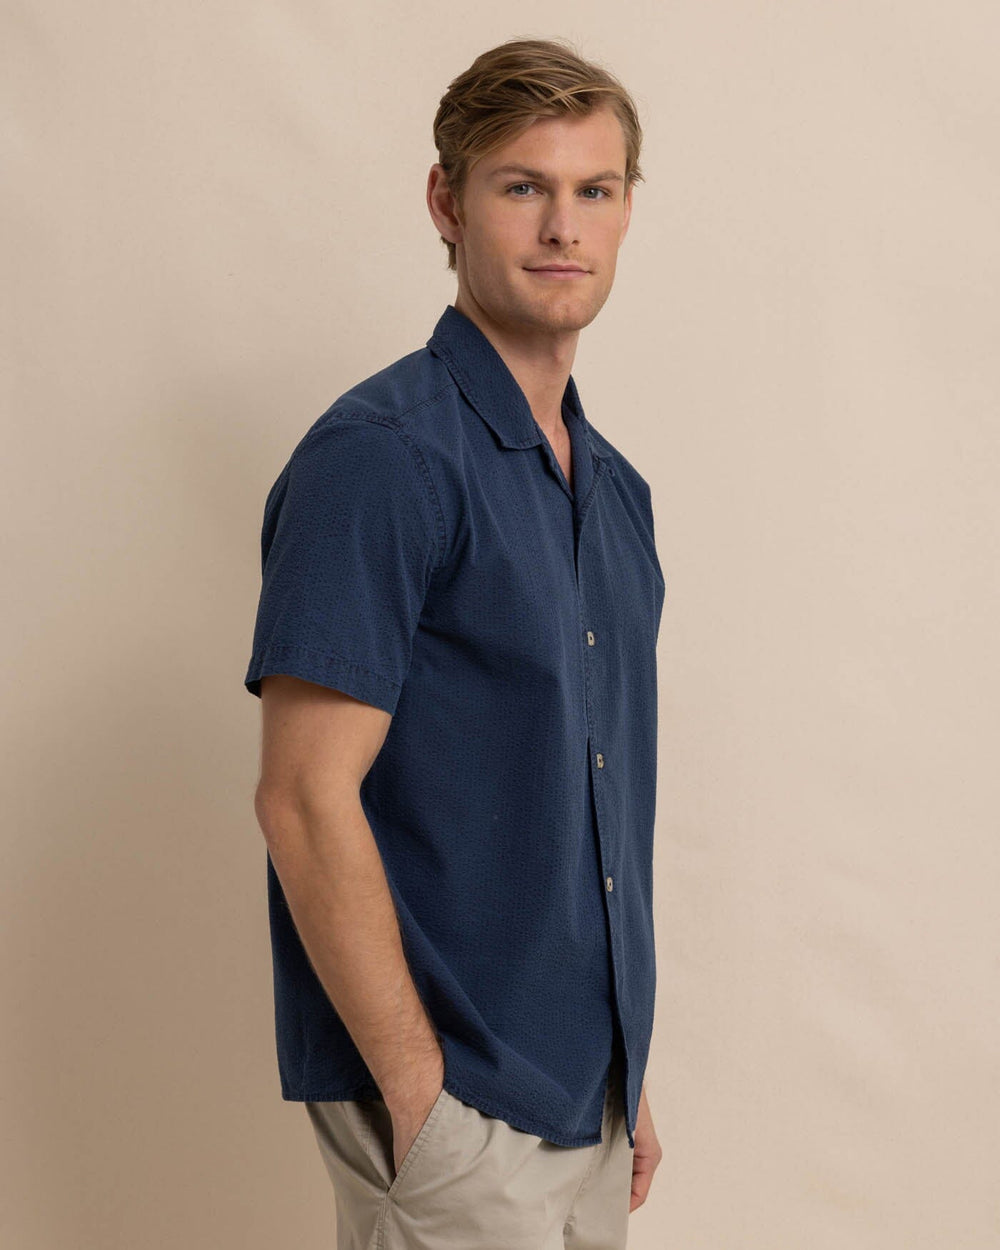 The front view of the Southern Tide Sun Washed Seerscuker Camp Short Sleeve Sport Shirt by Southern Tide - Dress Blue